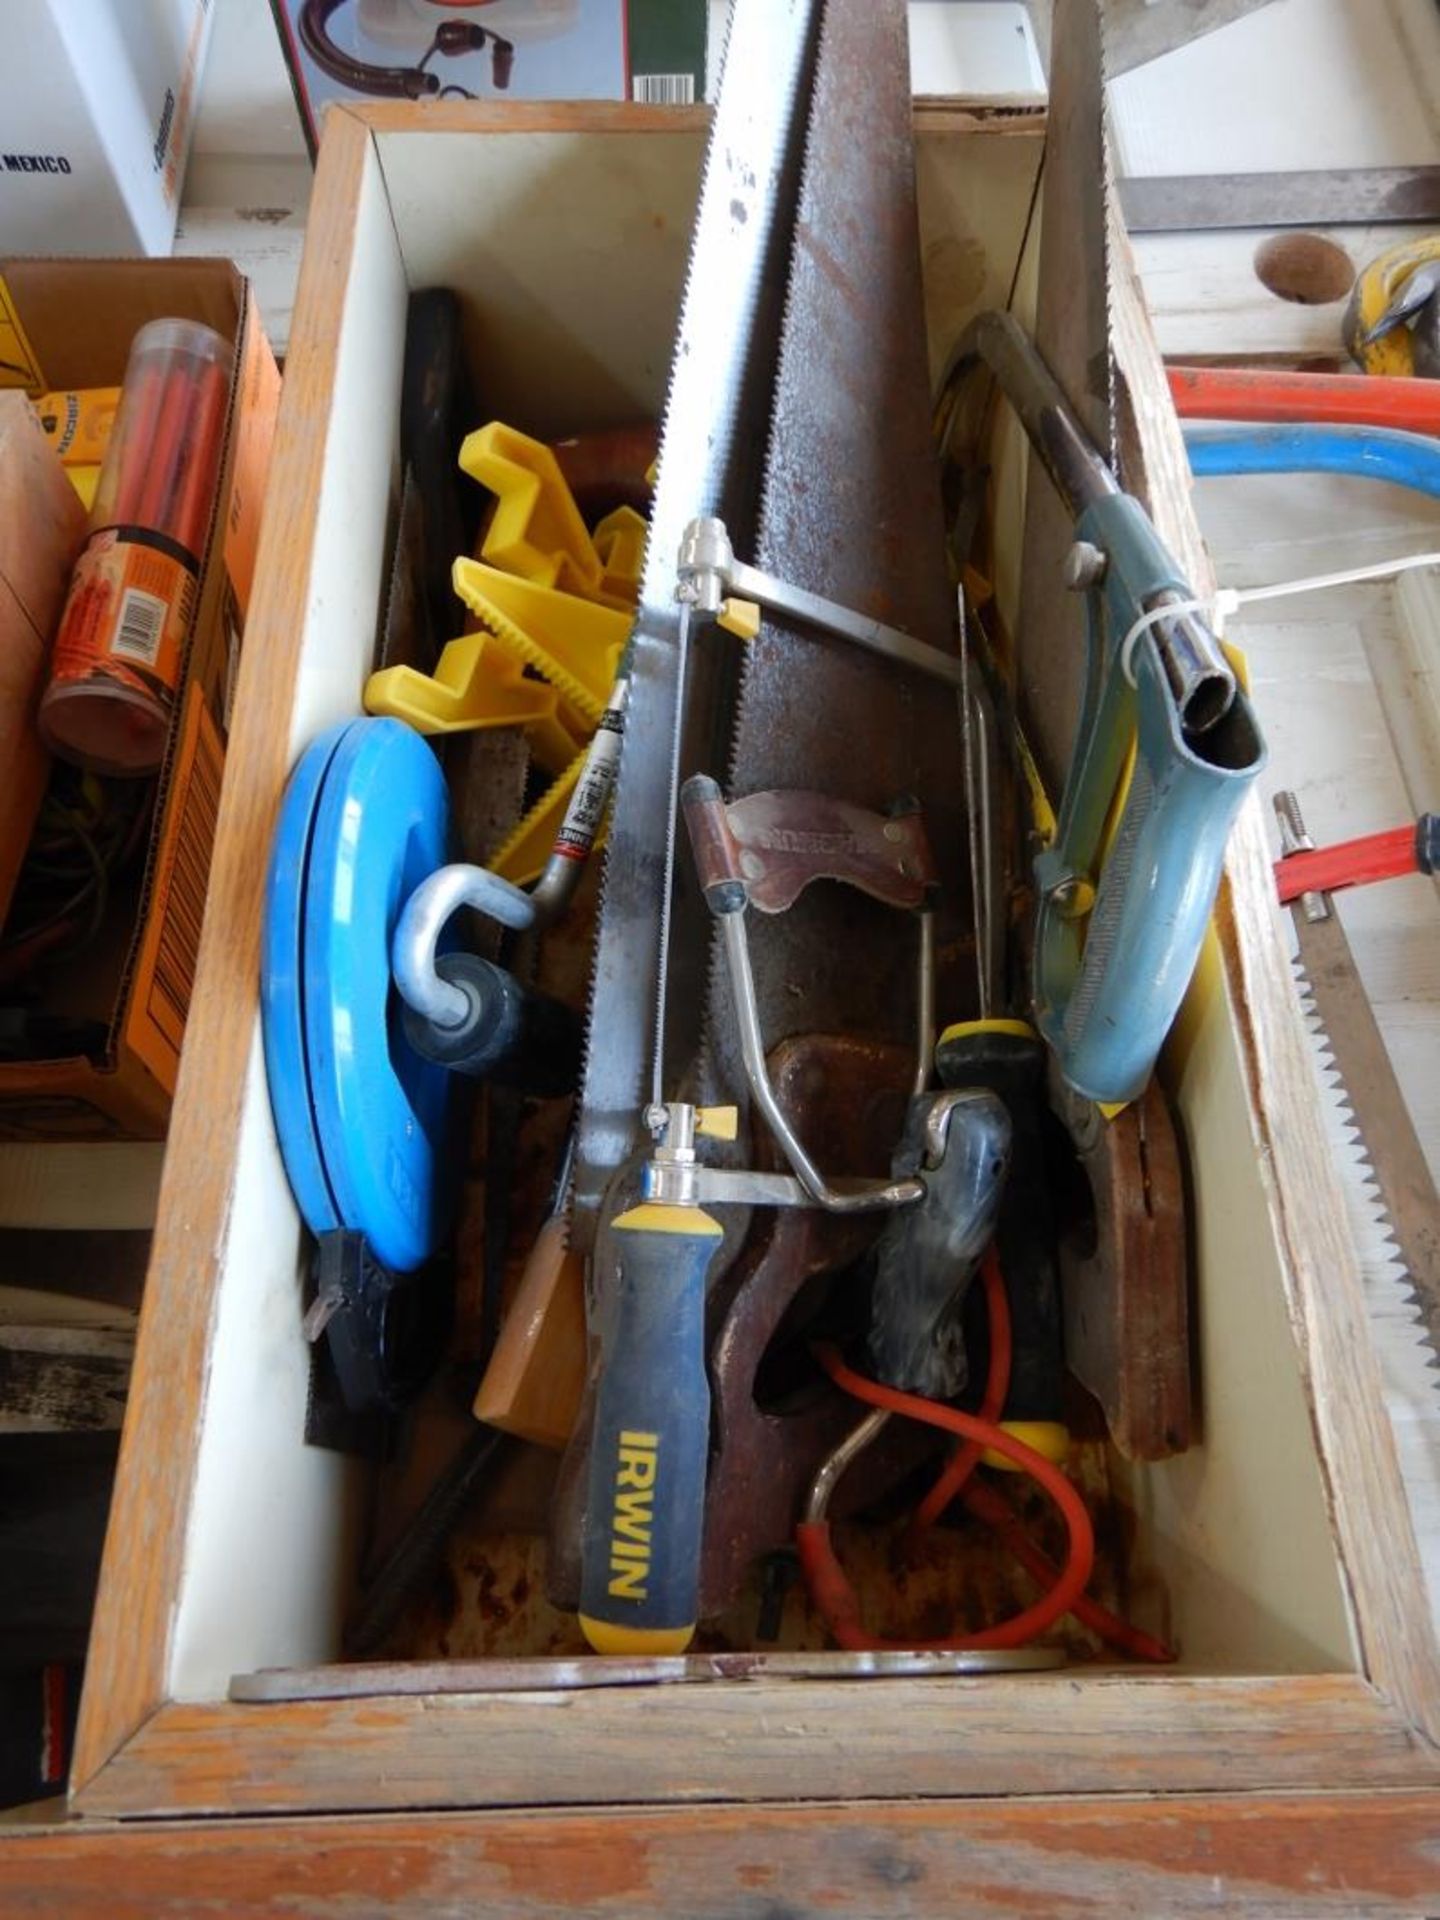 L/O ASSORTED HAND SAWS, COPING SAW, MITRE BOX, MITRE SAW, & MORE - Image 2 of 2